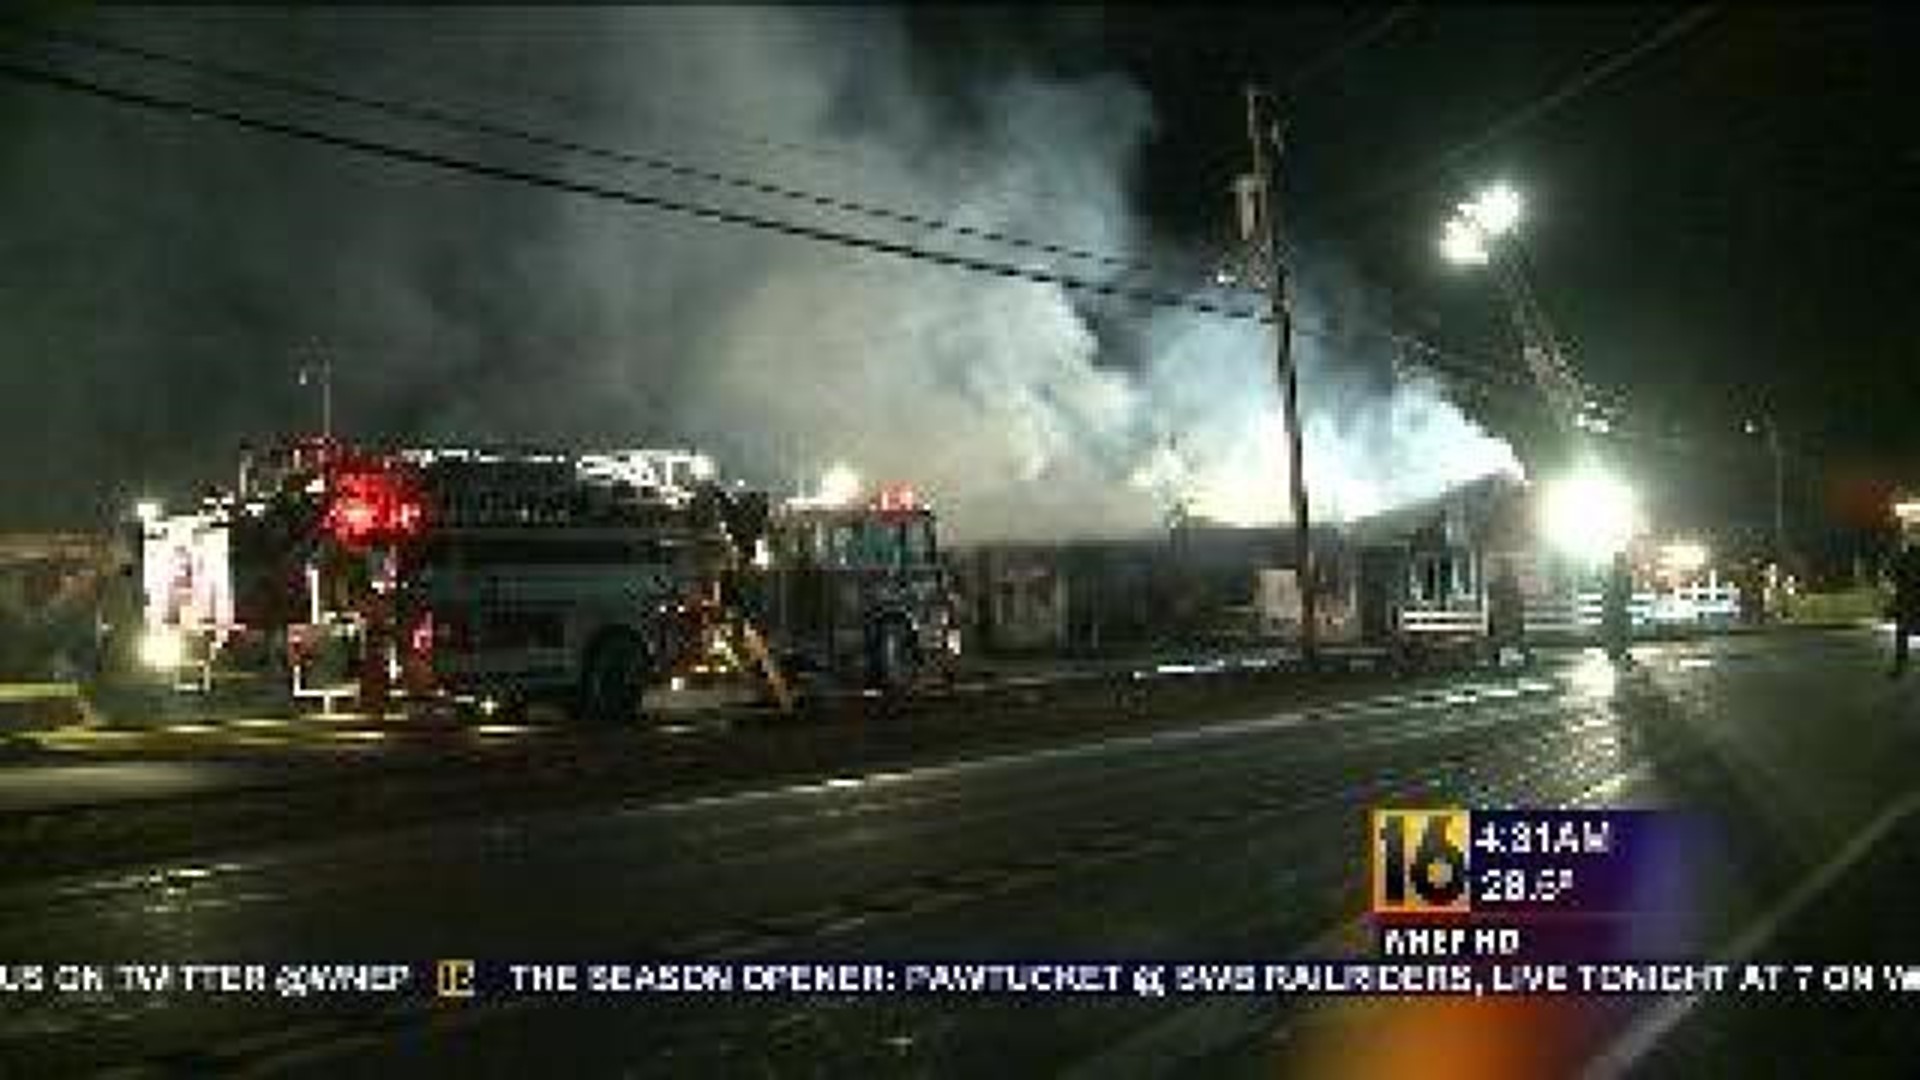 Restaurant Consumed by Fire